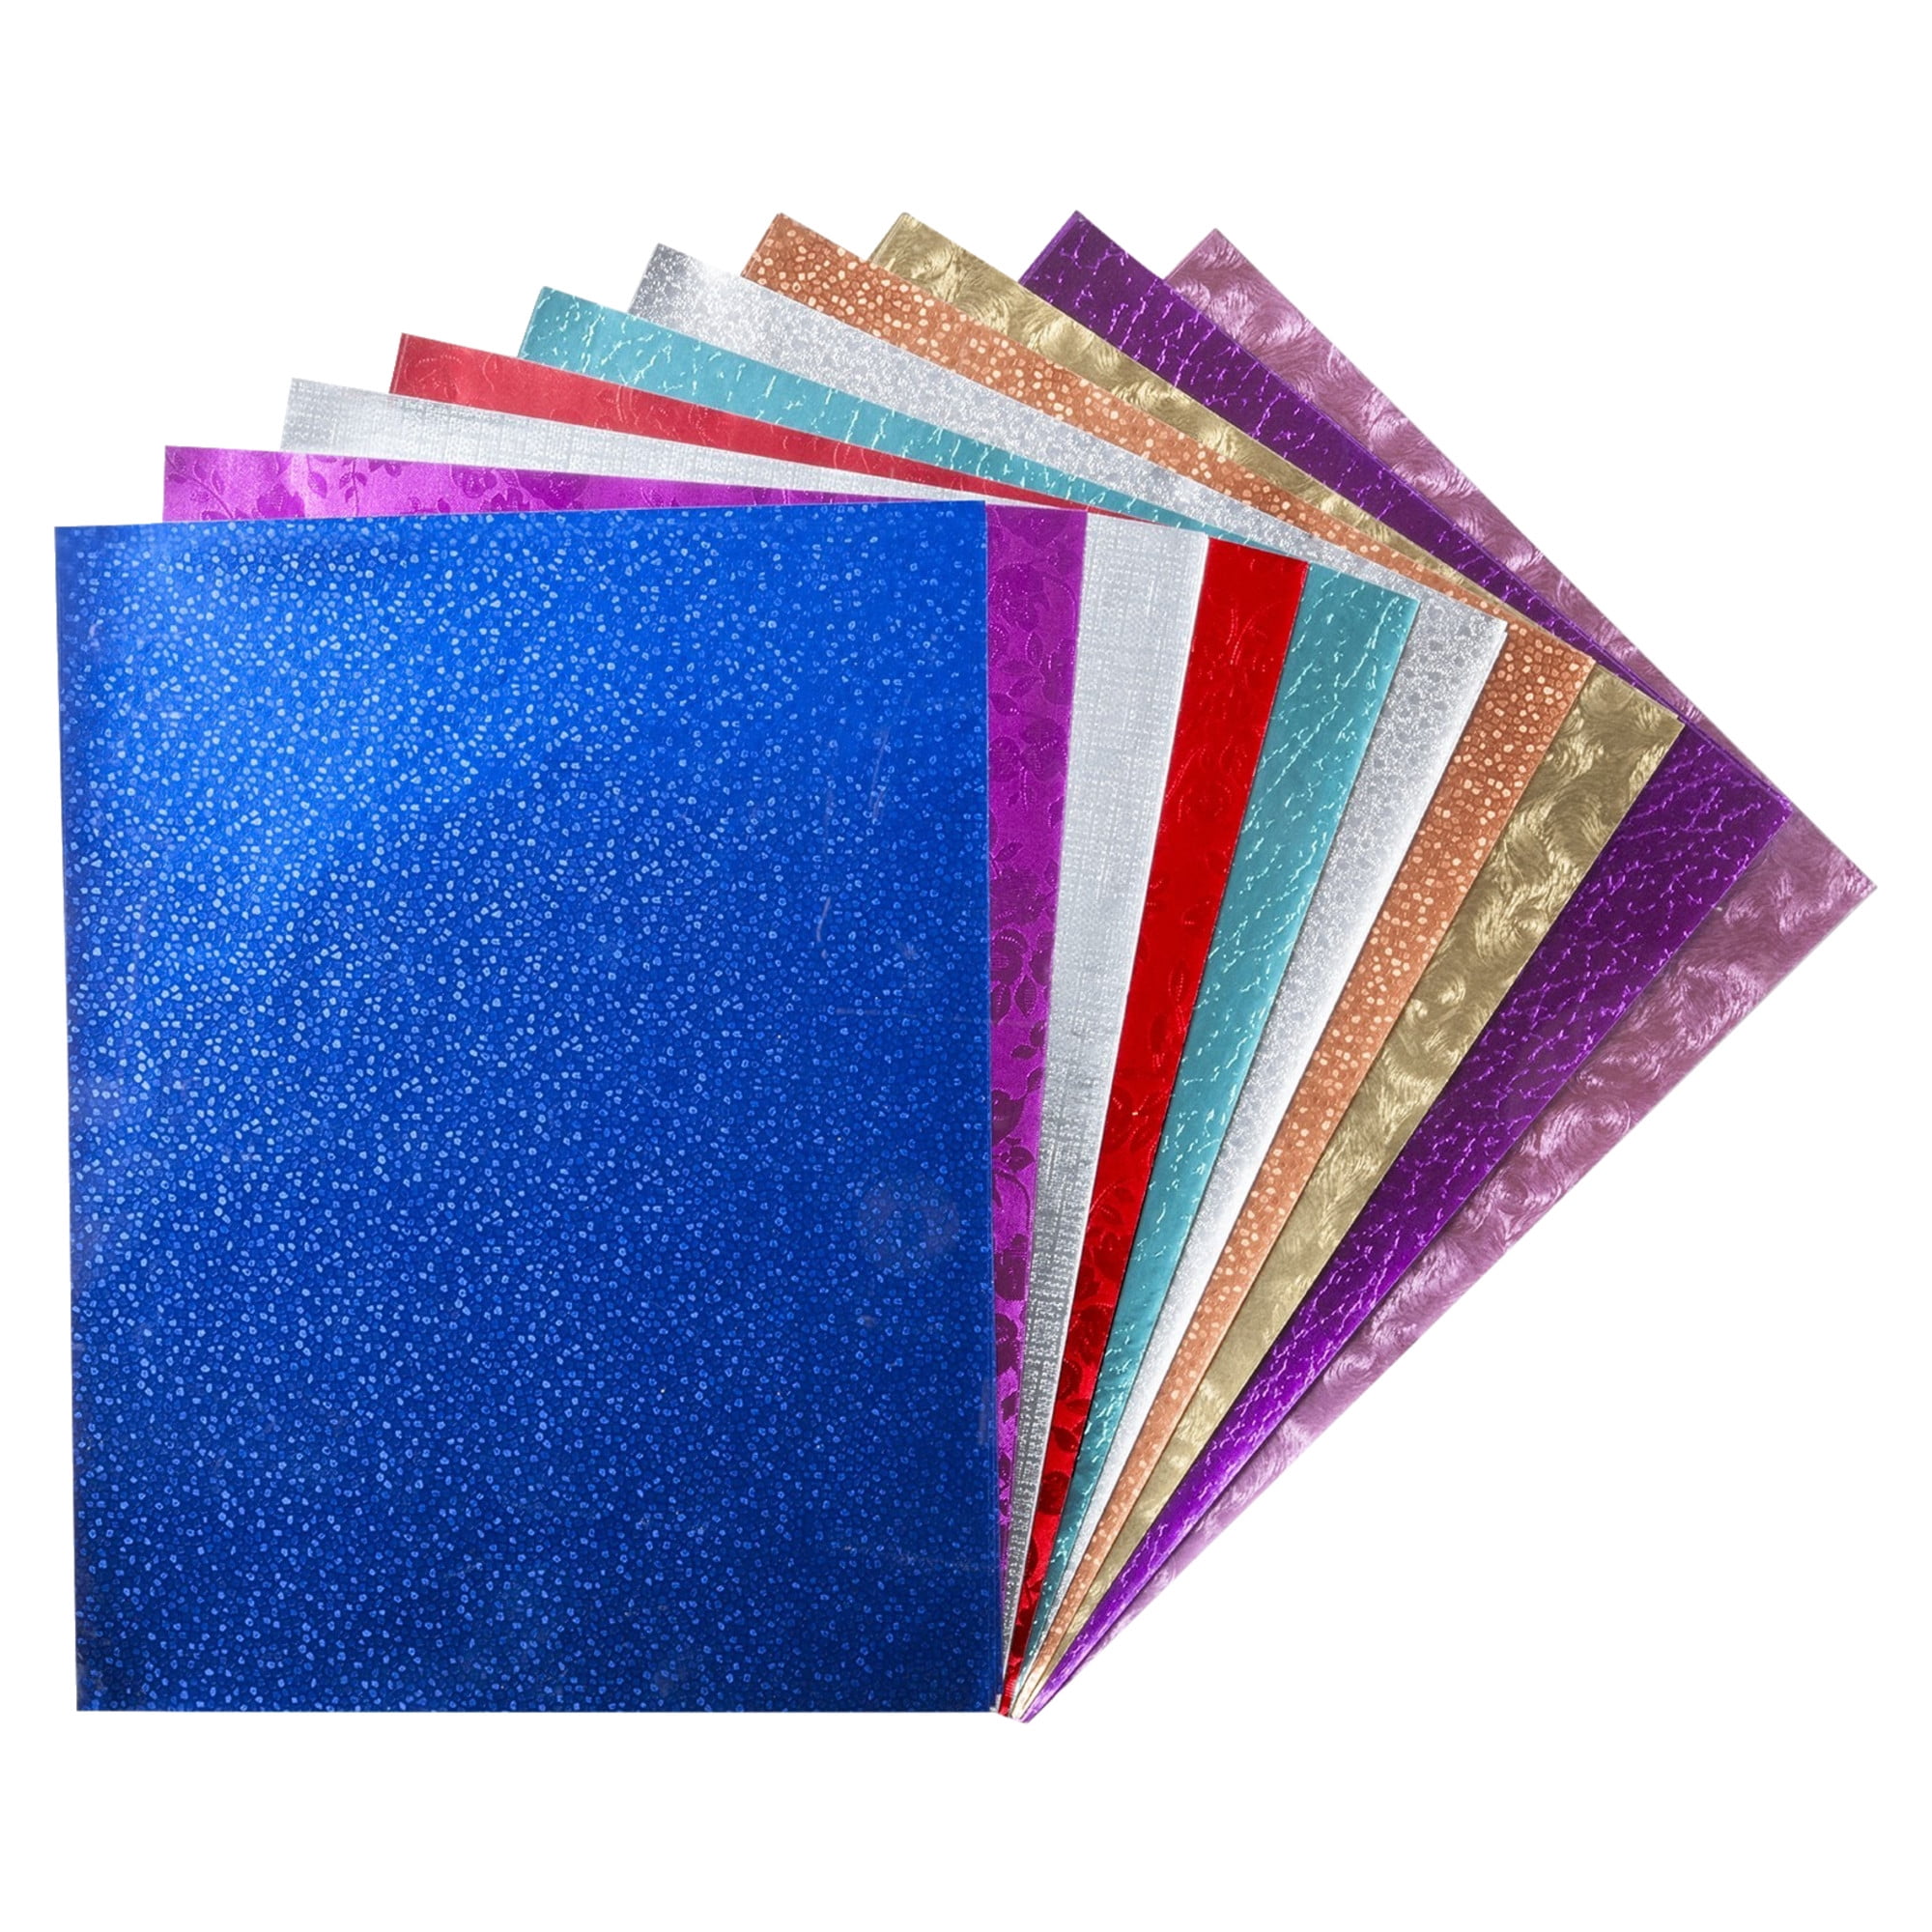 Hygloss - 16 PK Assorted 8.5 x 11 Super Glossy Paper